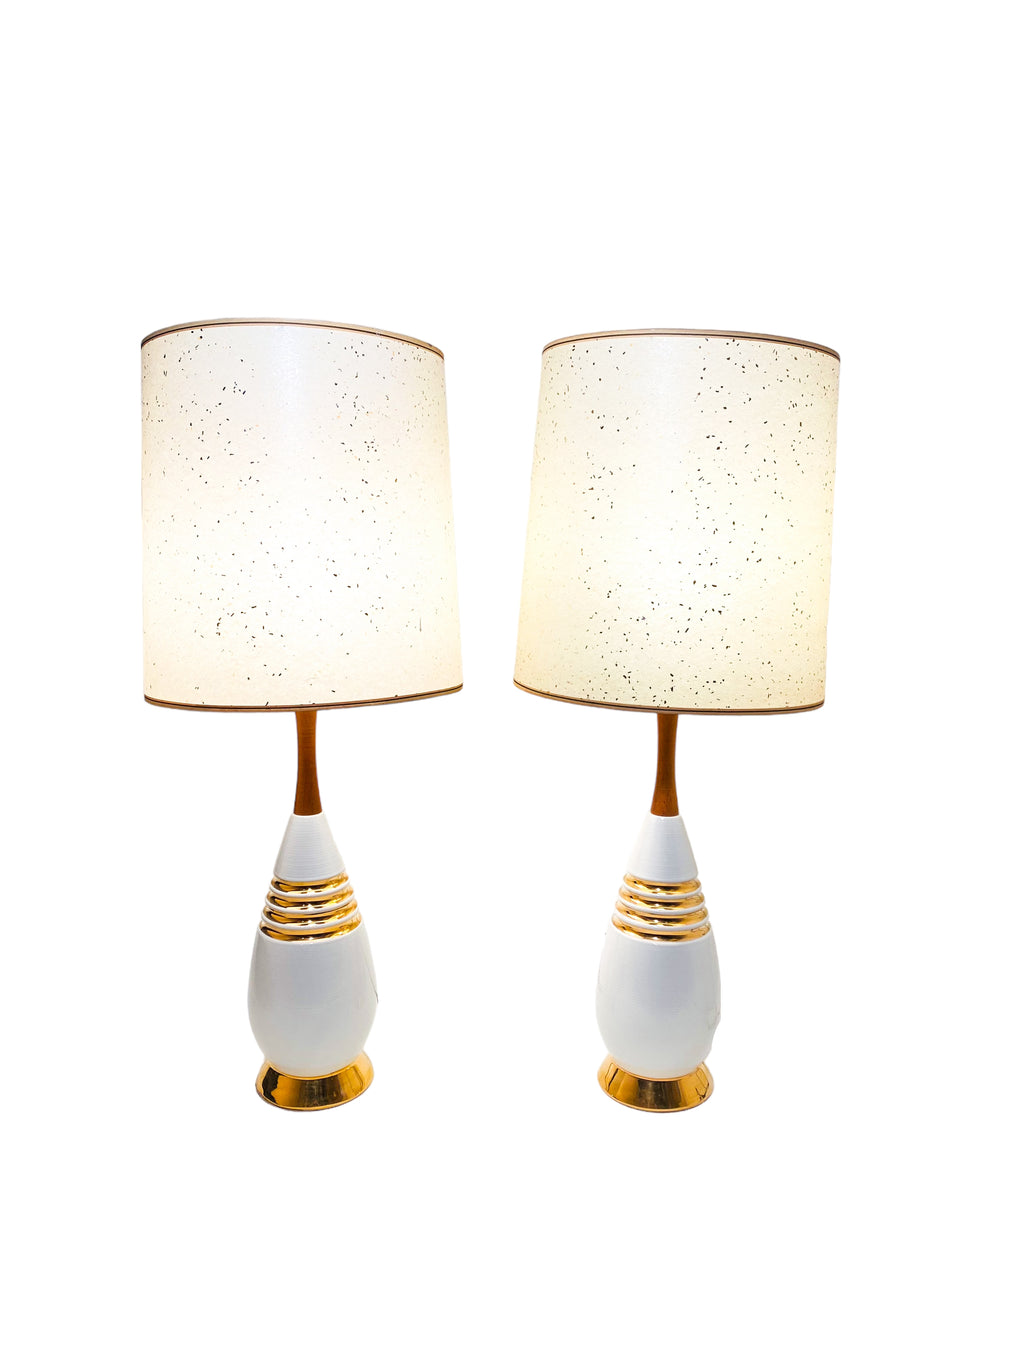 MCM Ceramic Lamps with Gold Detail & Teak Neck, Pair, **Local Pick Up Only